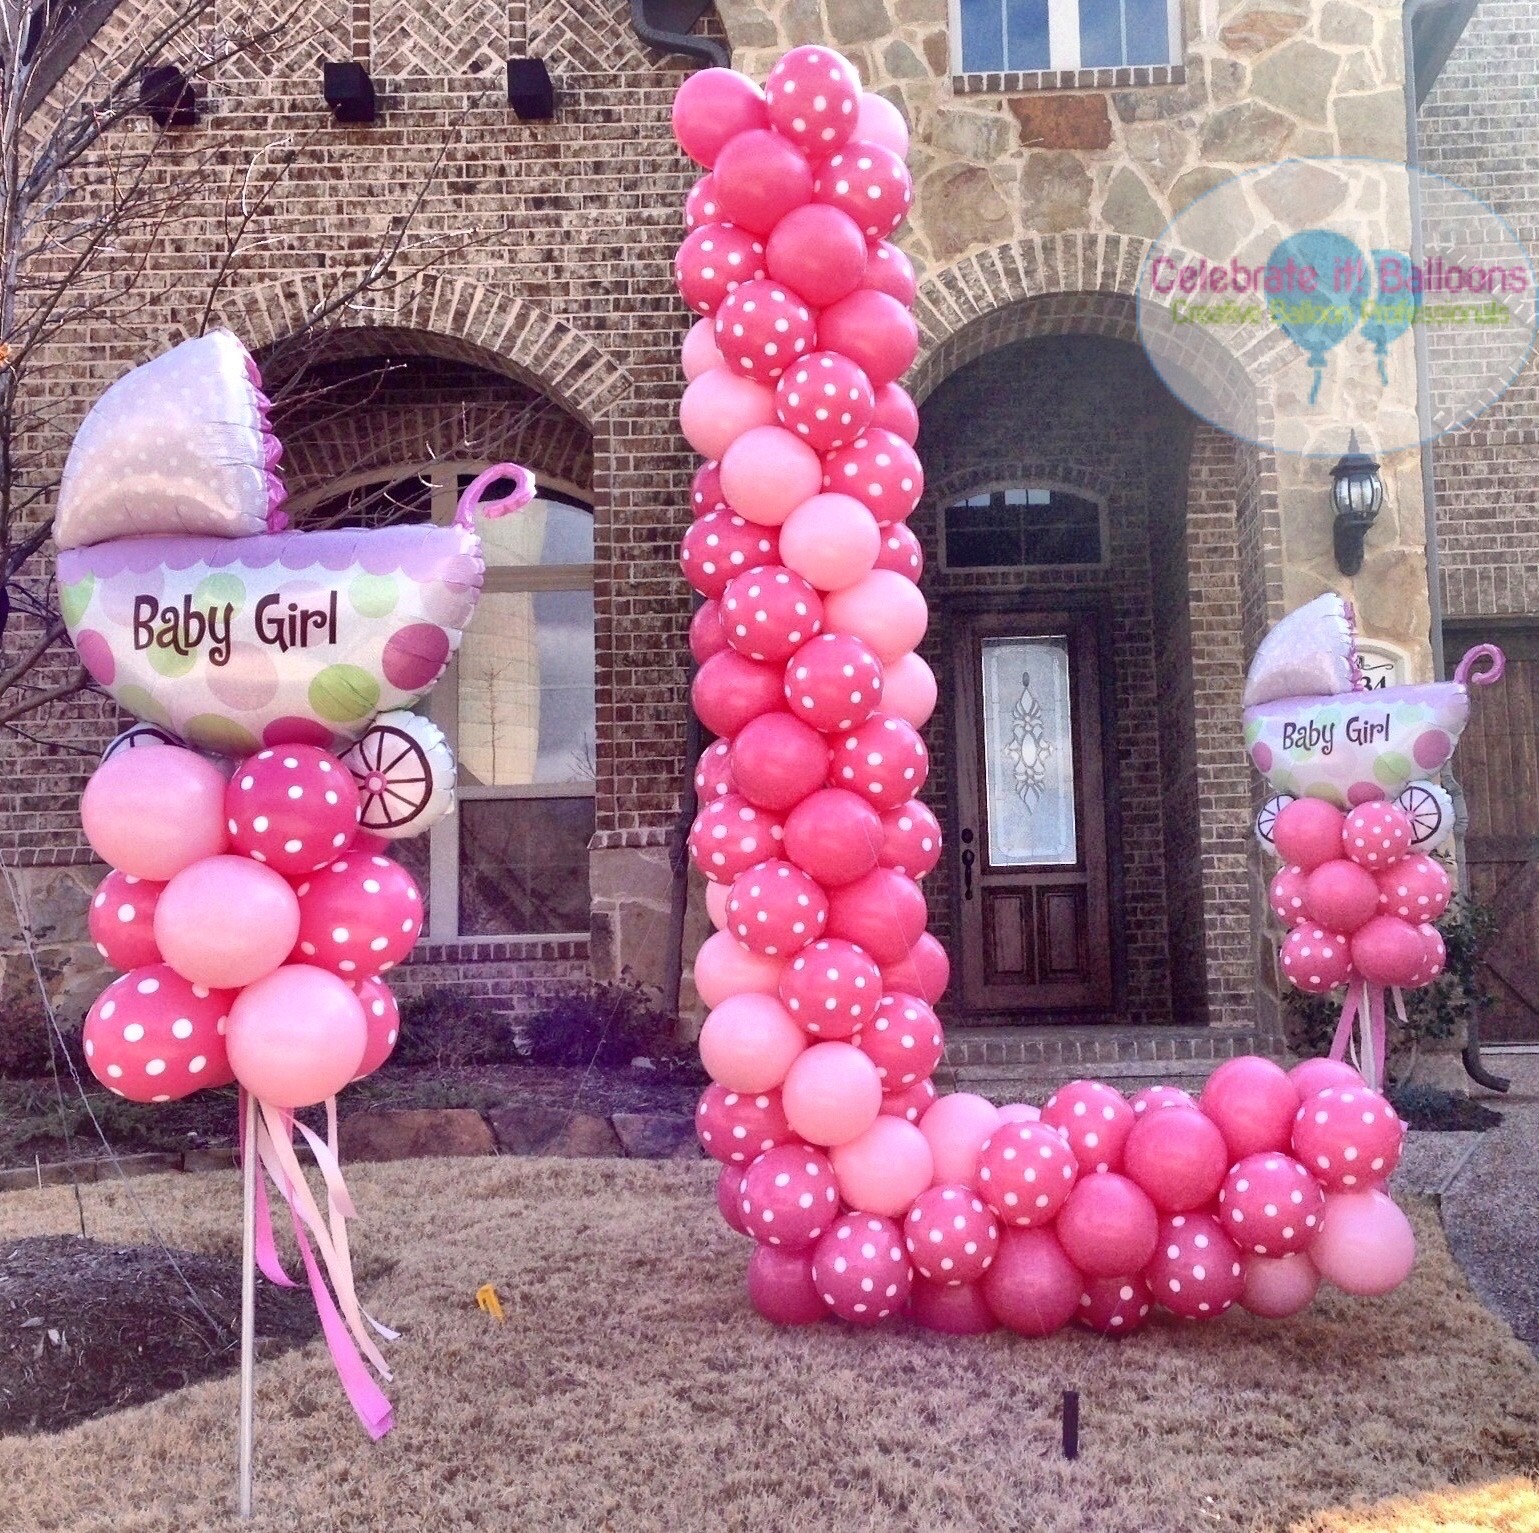 Welcome home baby yard balloons birth announcement balloon delivery in pink and pink polka dots.